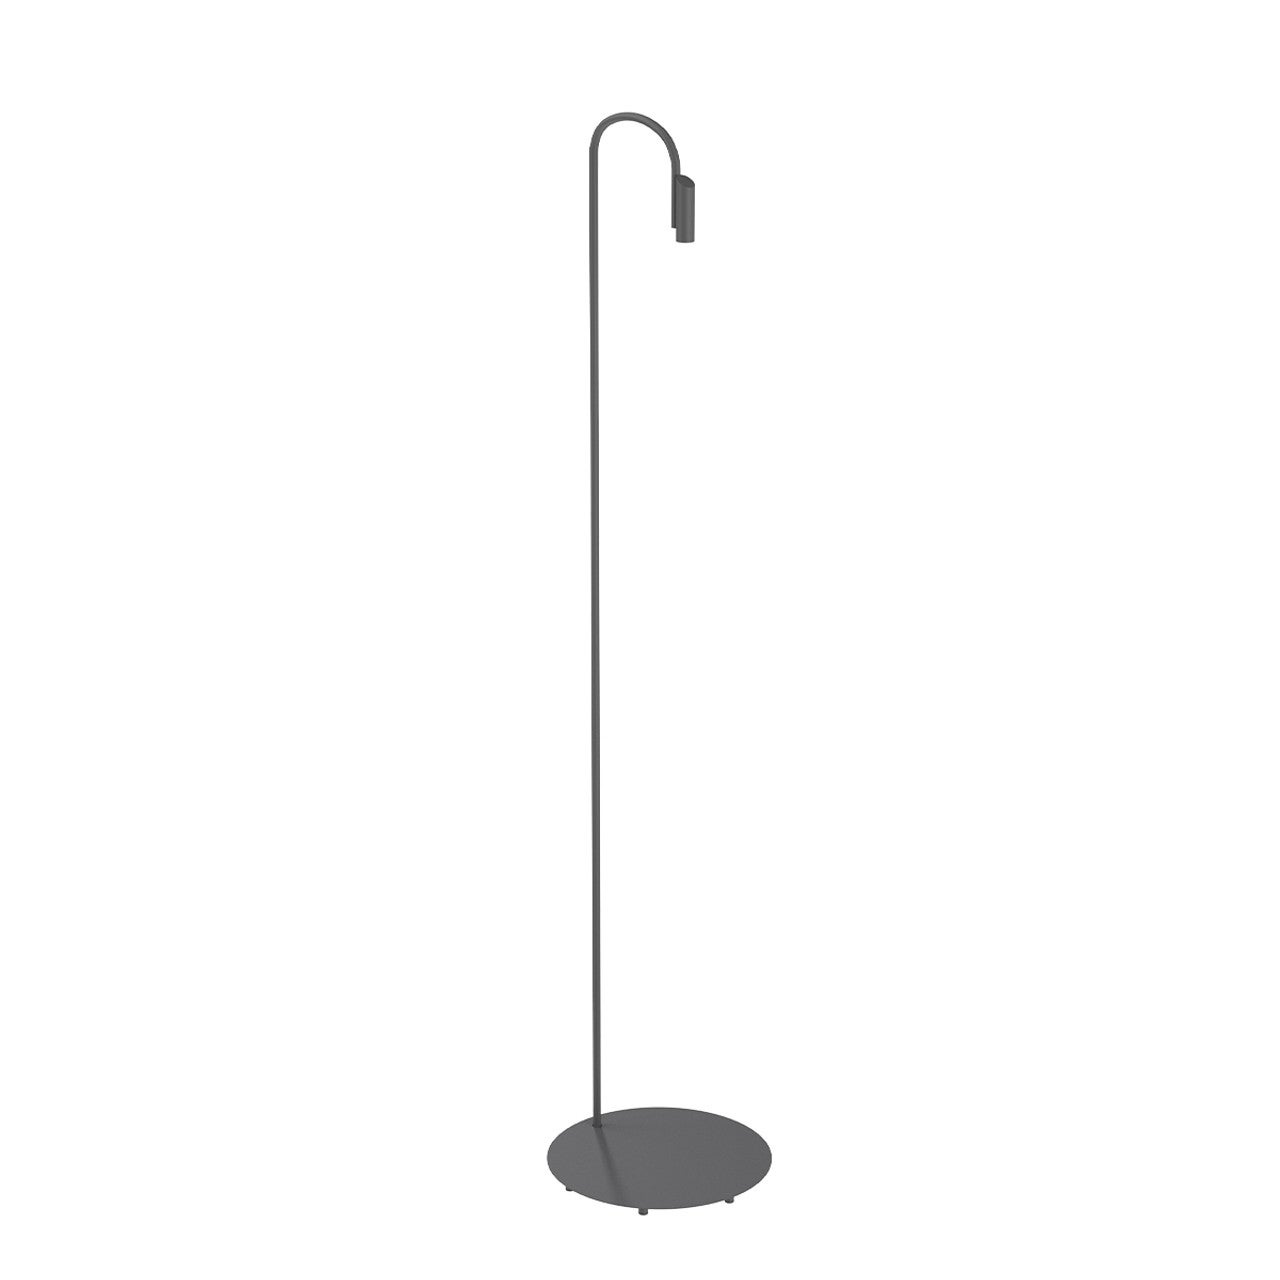 Flos Caule 3000K Model 5 Outdoor Floor Lamp in Anthracite with Regular Shade For Sale